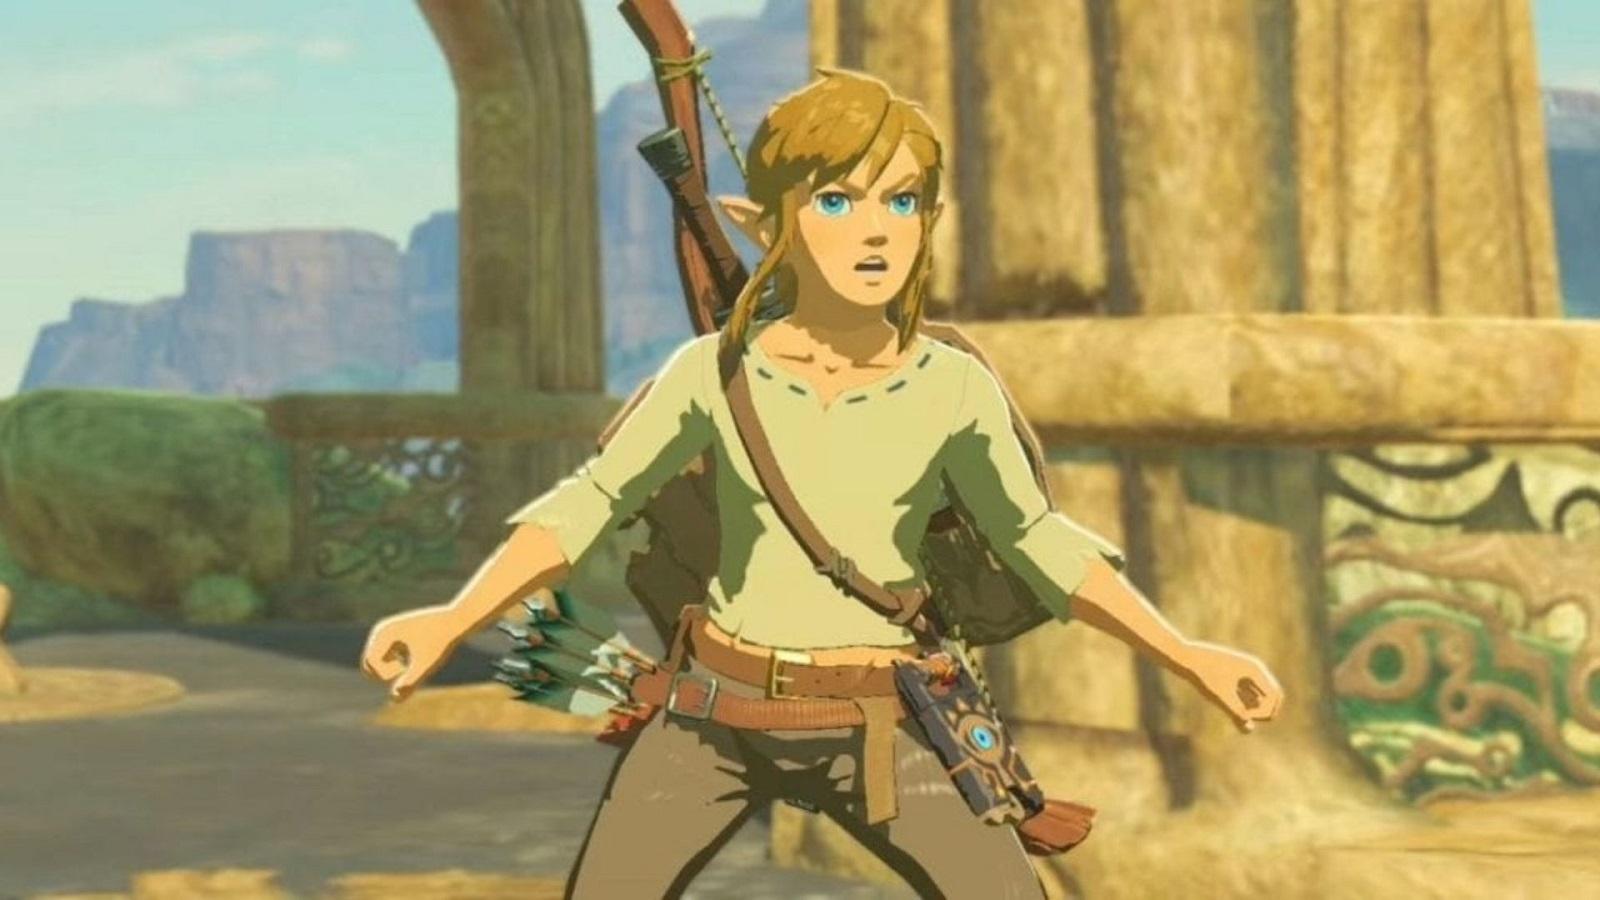 Zelda Breath Of The Wild 2 Is Currently Planned For A 2020 Release - Rumor